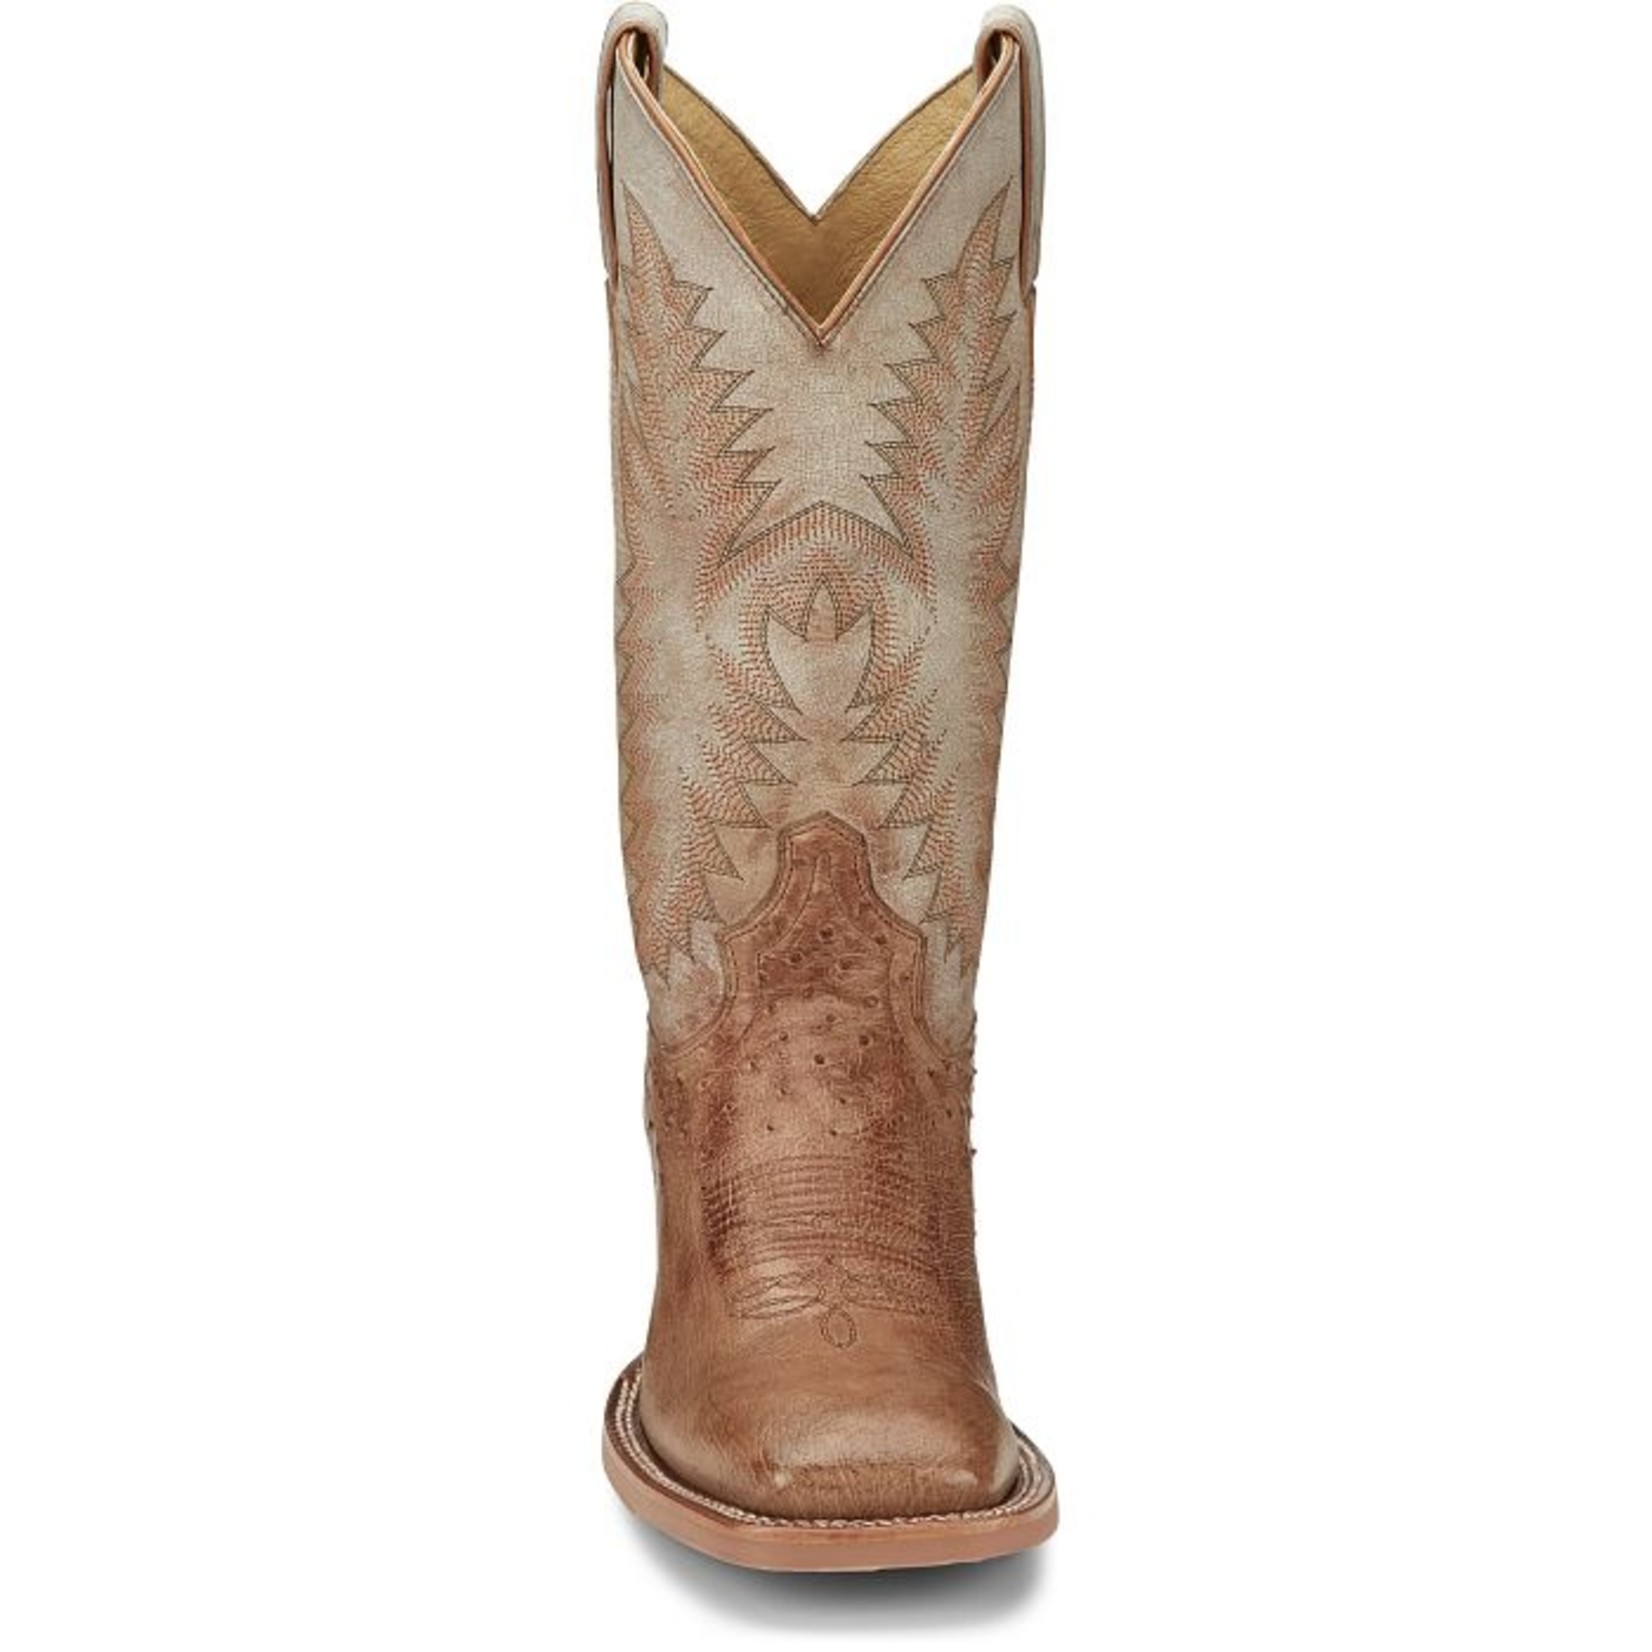 JUSTIN BOOTS 13" BRECK SMOOTH OSTRICH IVORY WESTERN